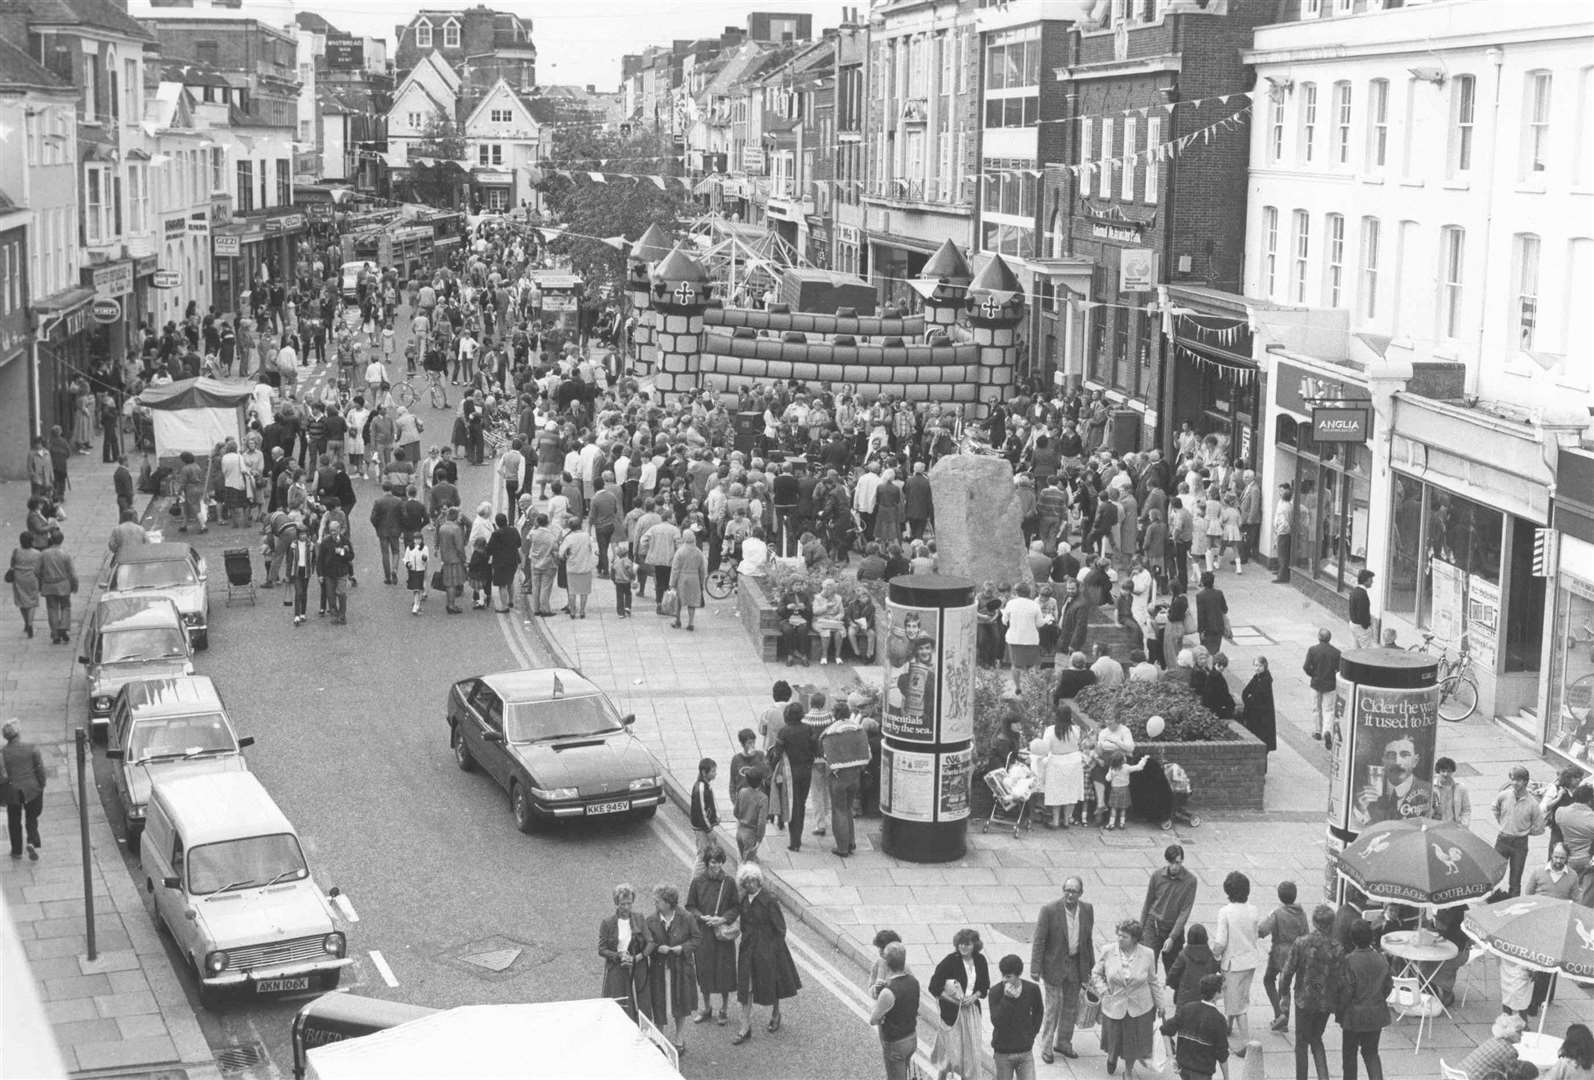 The Lower High Street in Ashford, in 1983, once pulled in big crowds for local events and, of course, shopping. Picture: Images of Ashford by Mike Bennett